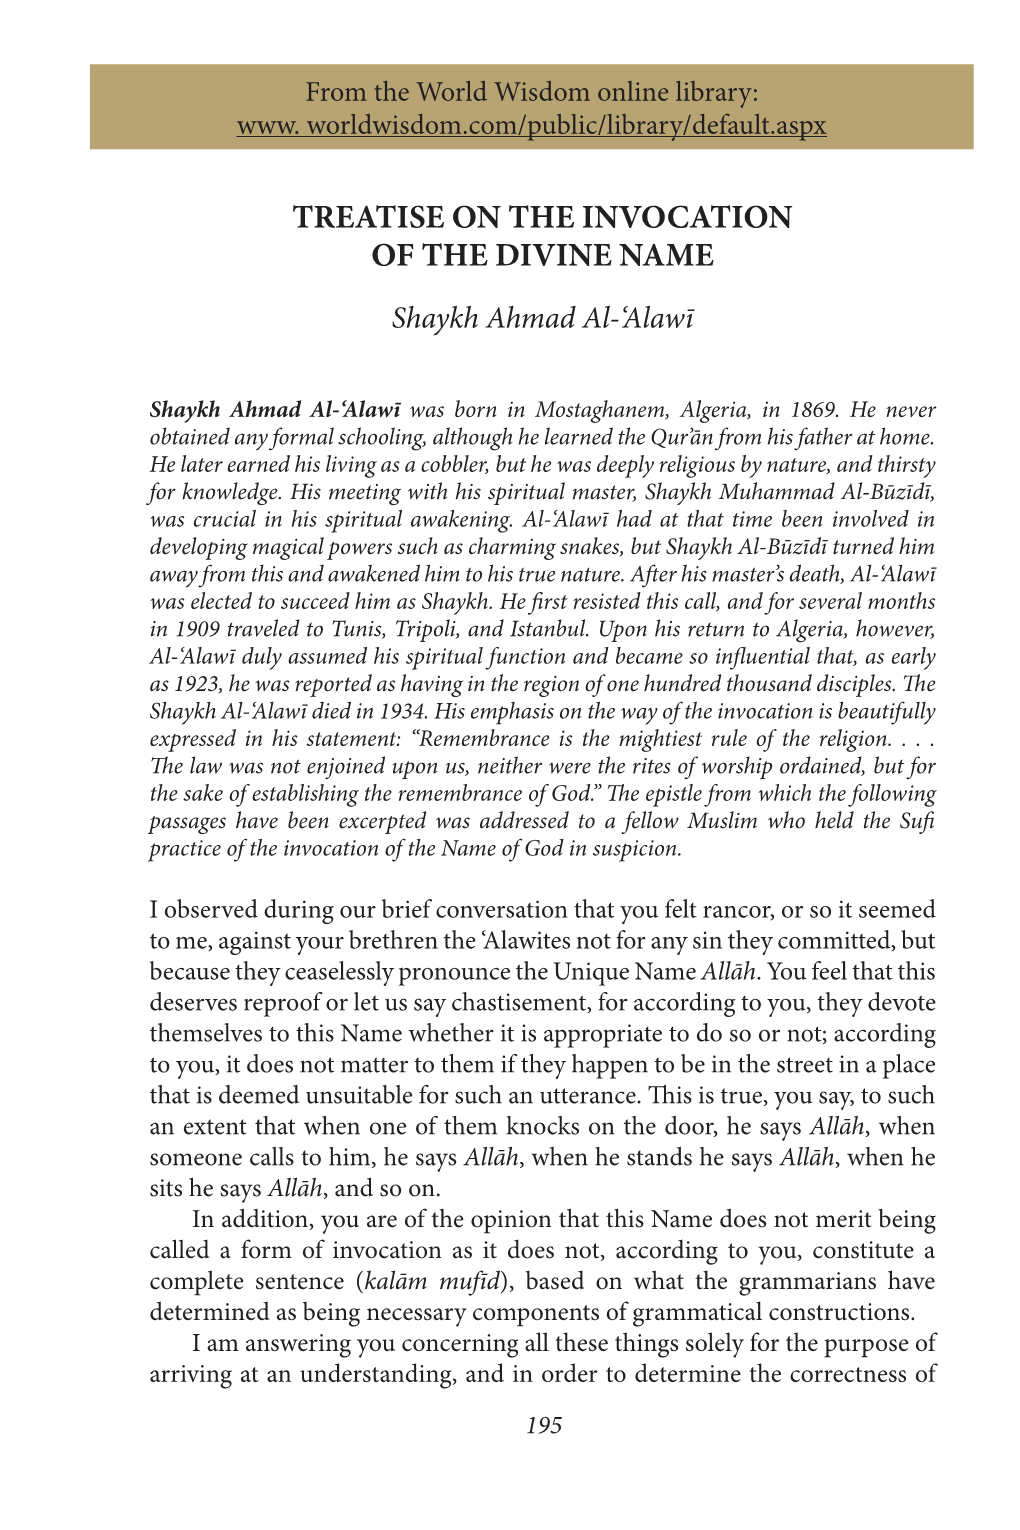 "Treatise on the Invocation of the Divine Name" by Shaykh Ahmad Al